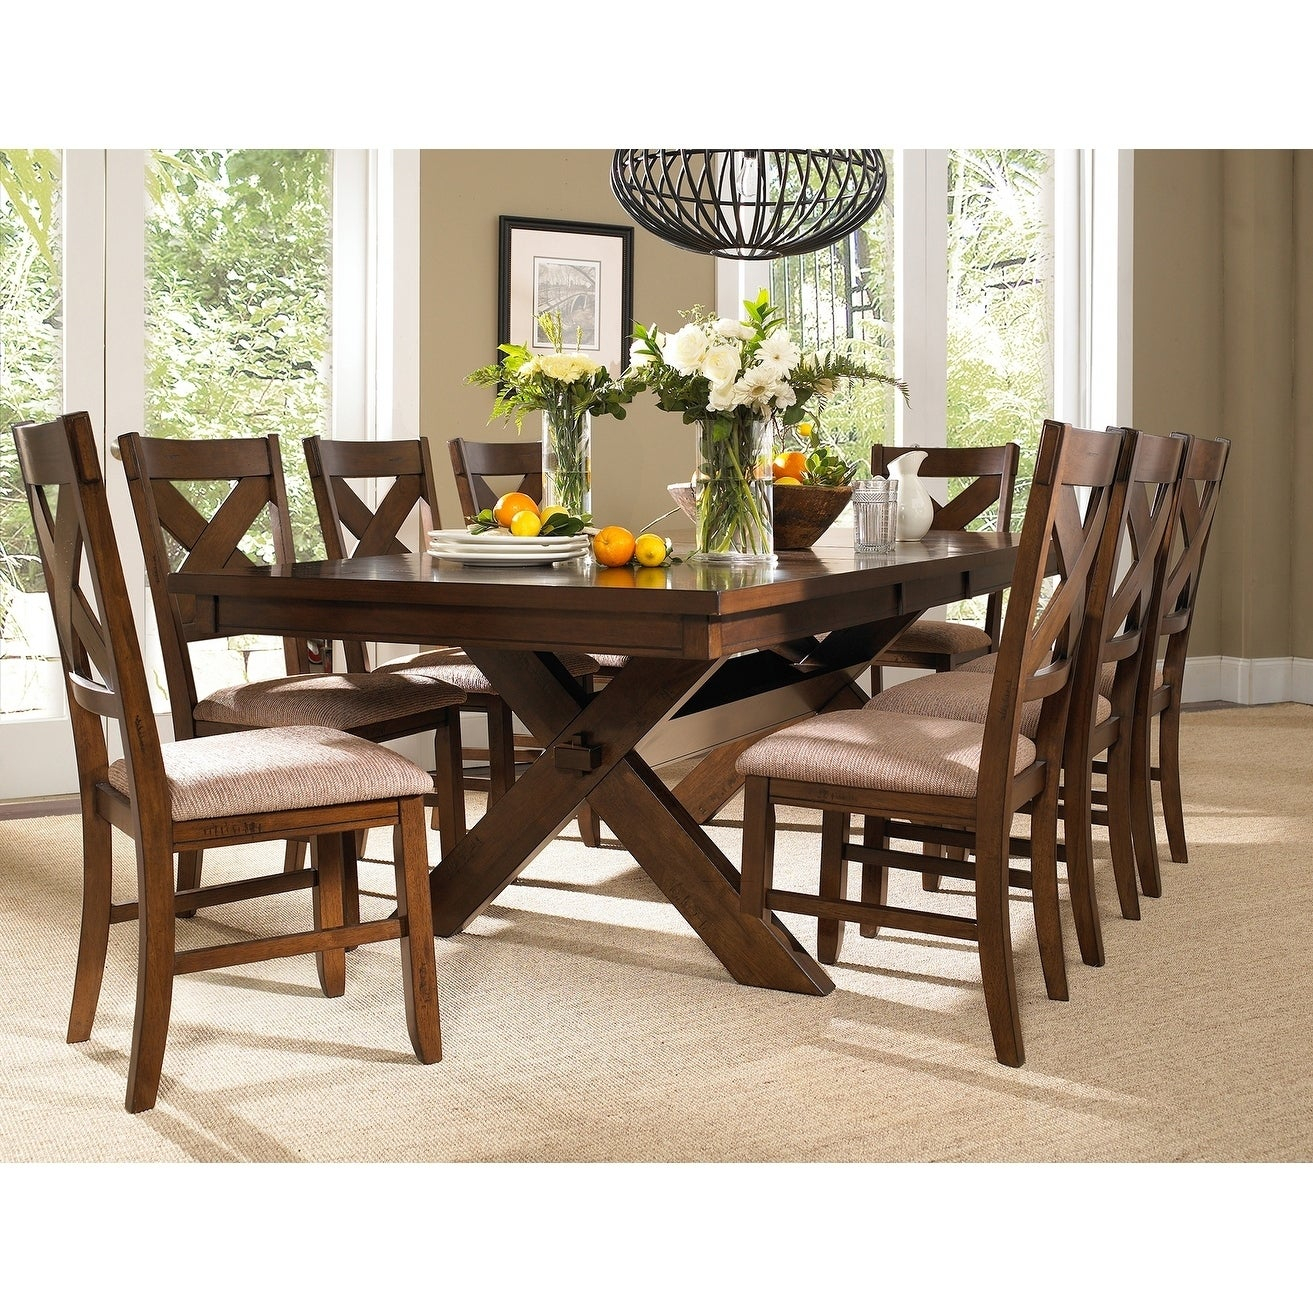 9 Piece Solid Wood Dining Set With Table And 8 Chairs throughout dimensions 1313 X 1313